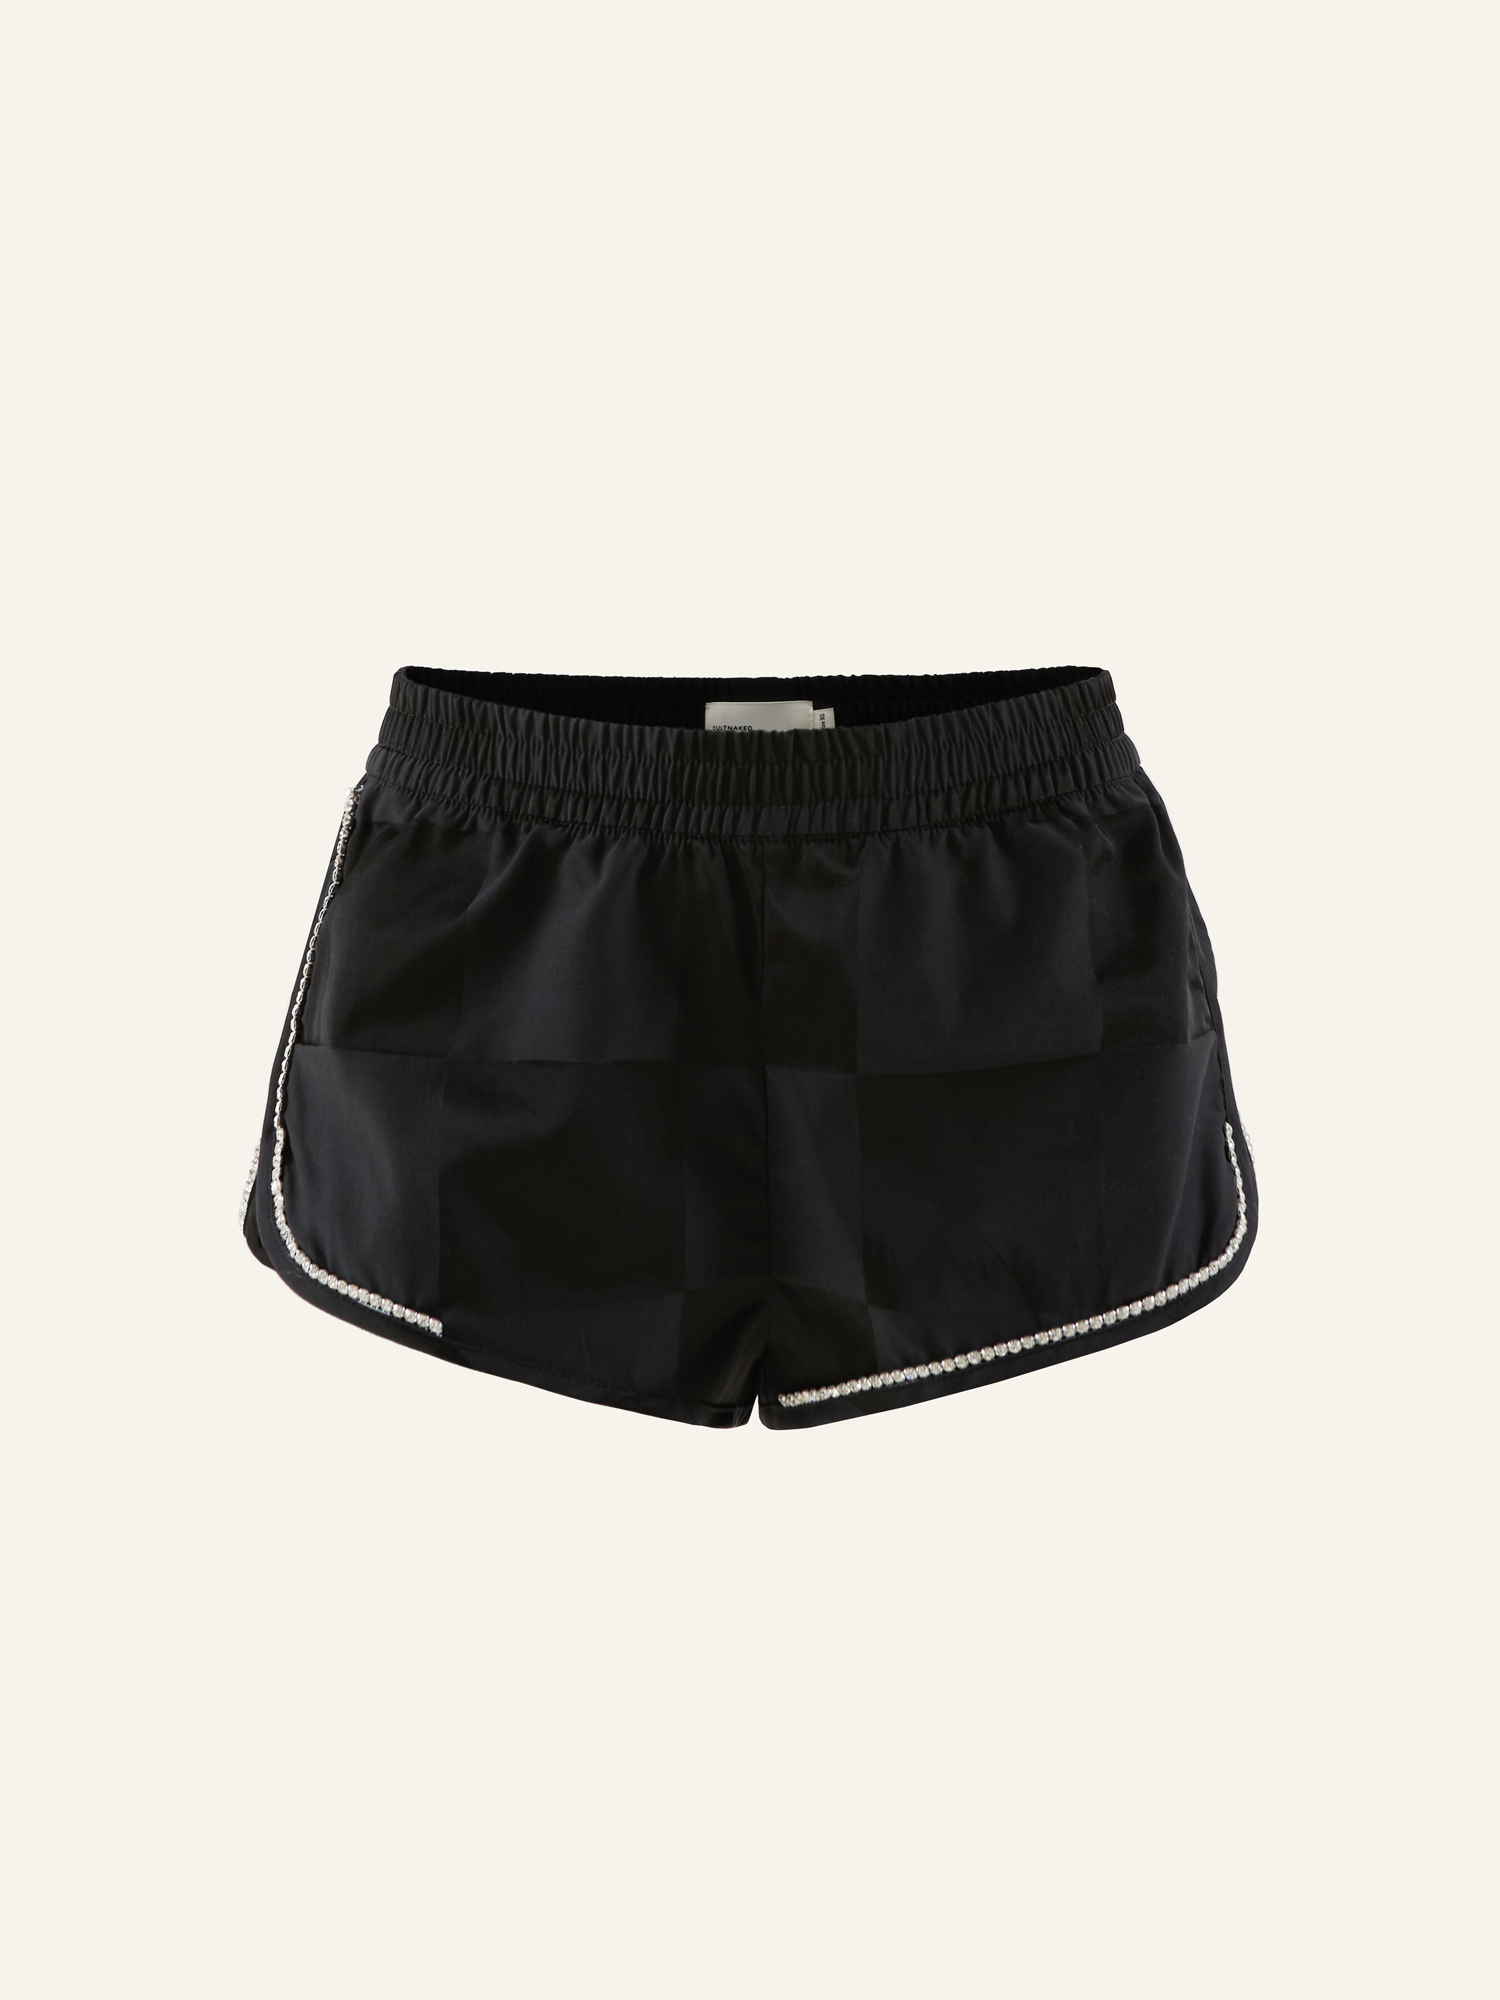 Product photo of black checkered cotton shorts, decorated with rhinestones